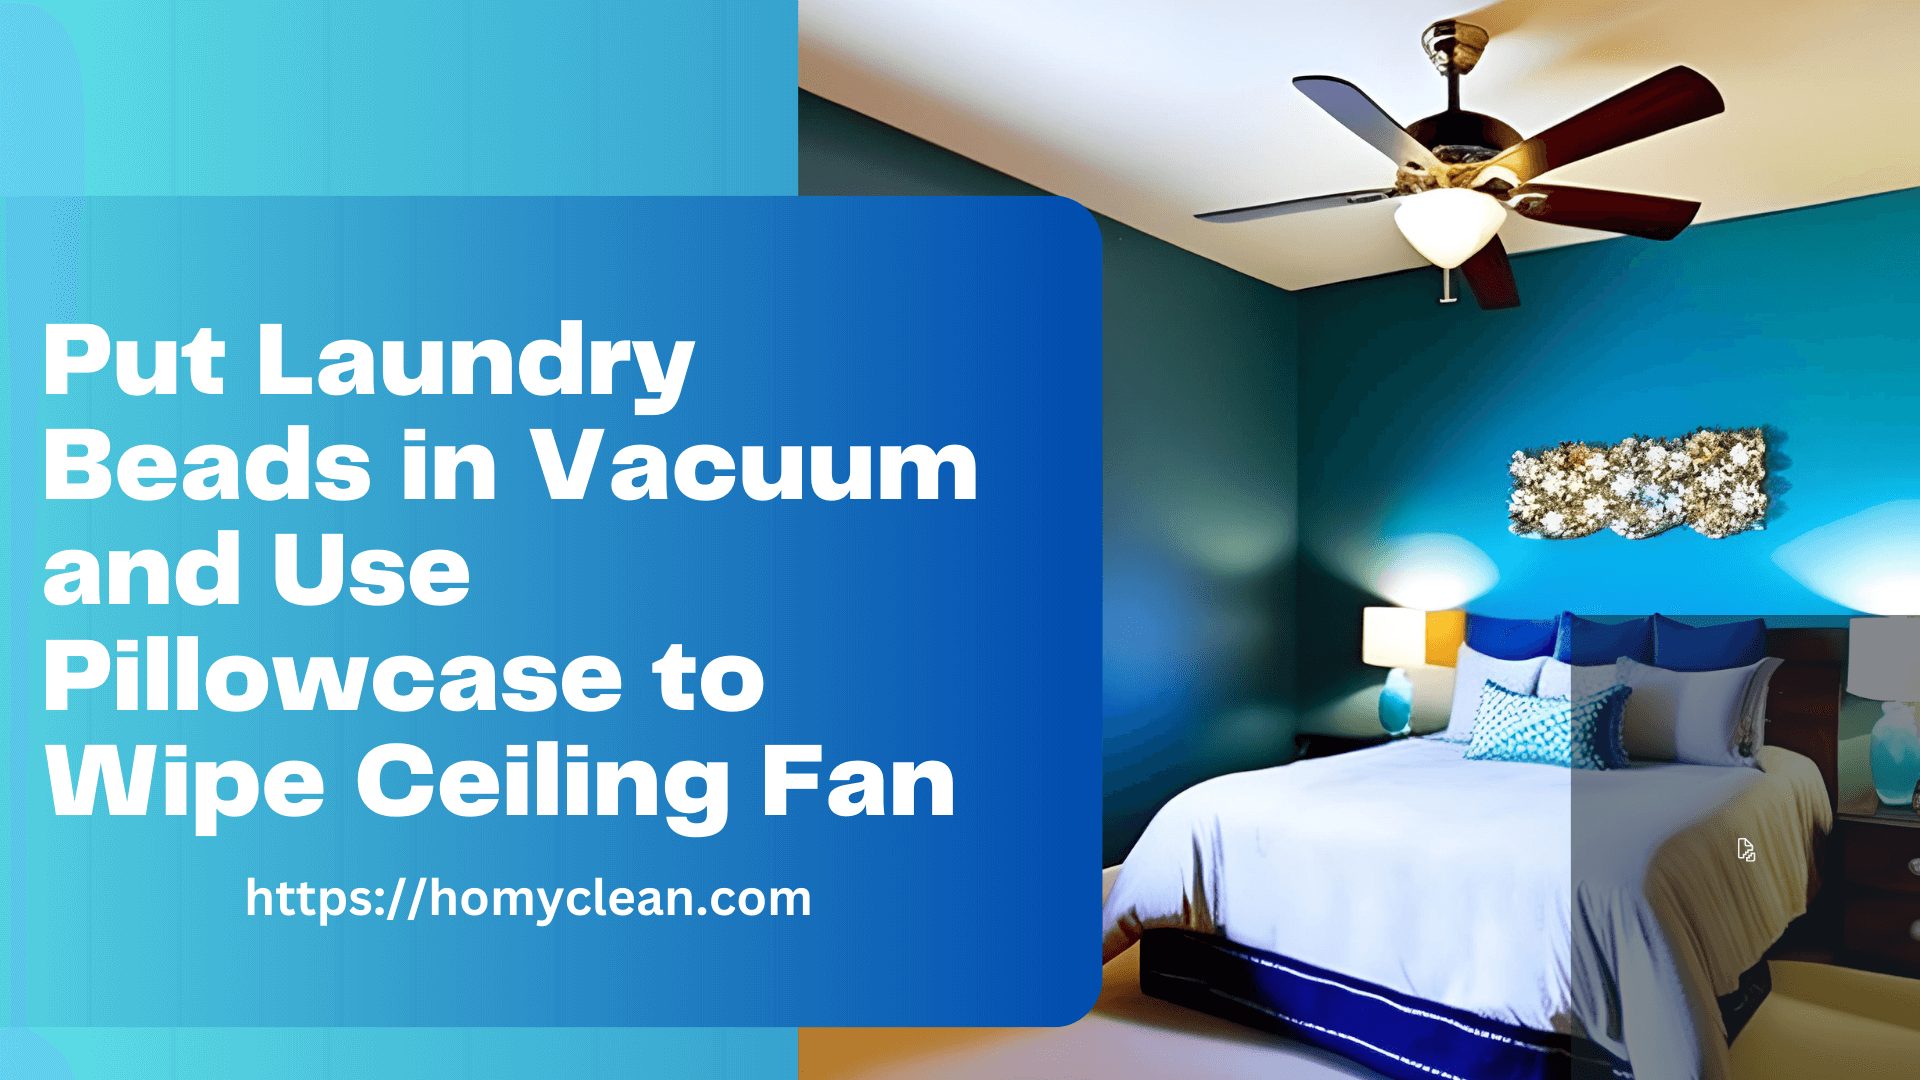 Best Laundry Beads in Vacuum and Use Pillowcase to Wipe Ceiling Fan